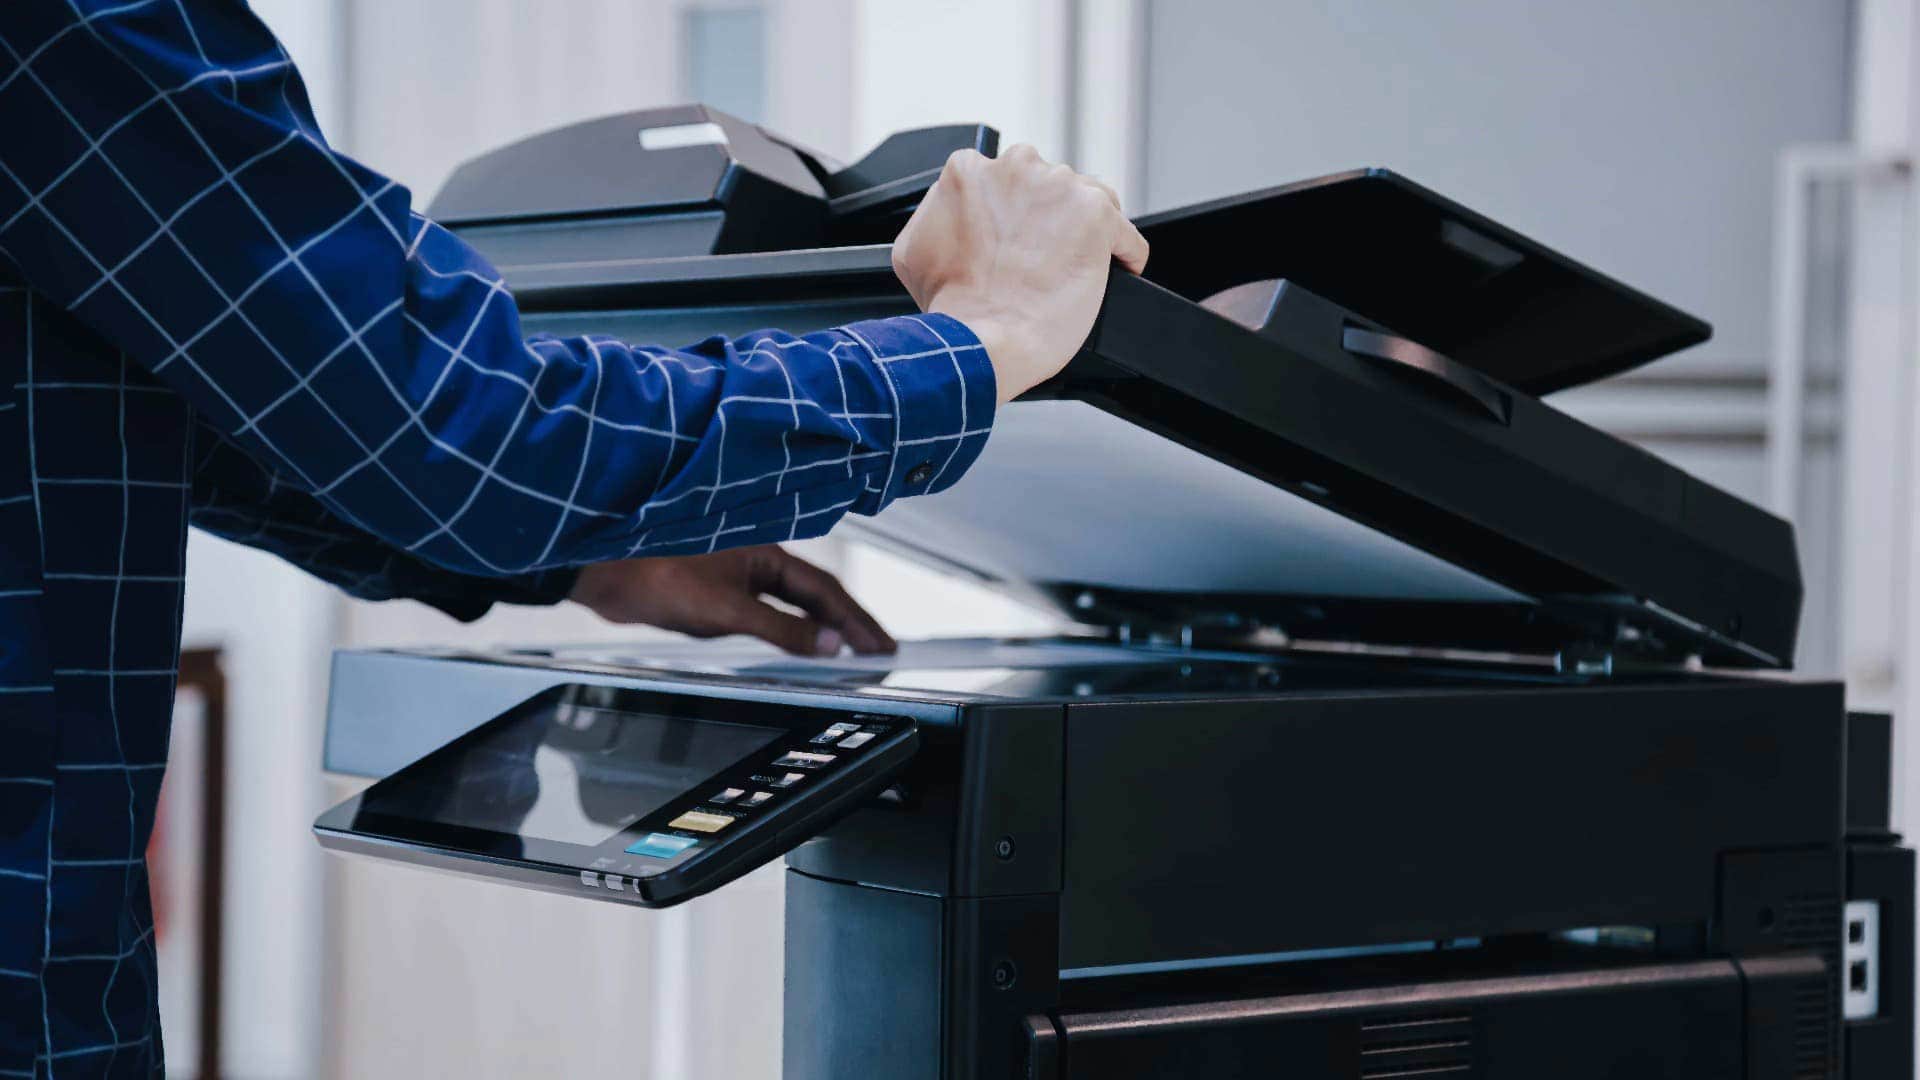 Copier printer close up hand office man press copy button on panel to using the copier or photocopier machine for scanning document printing a sheet paper